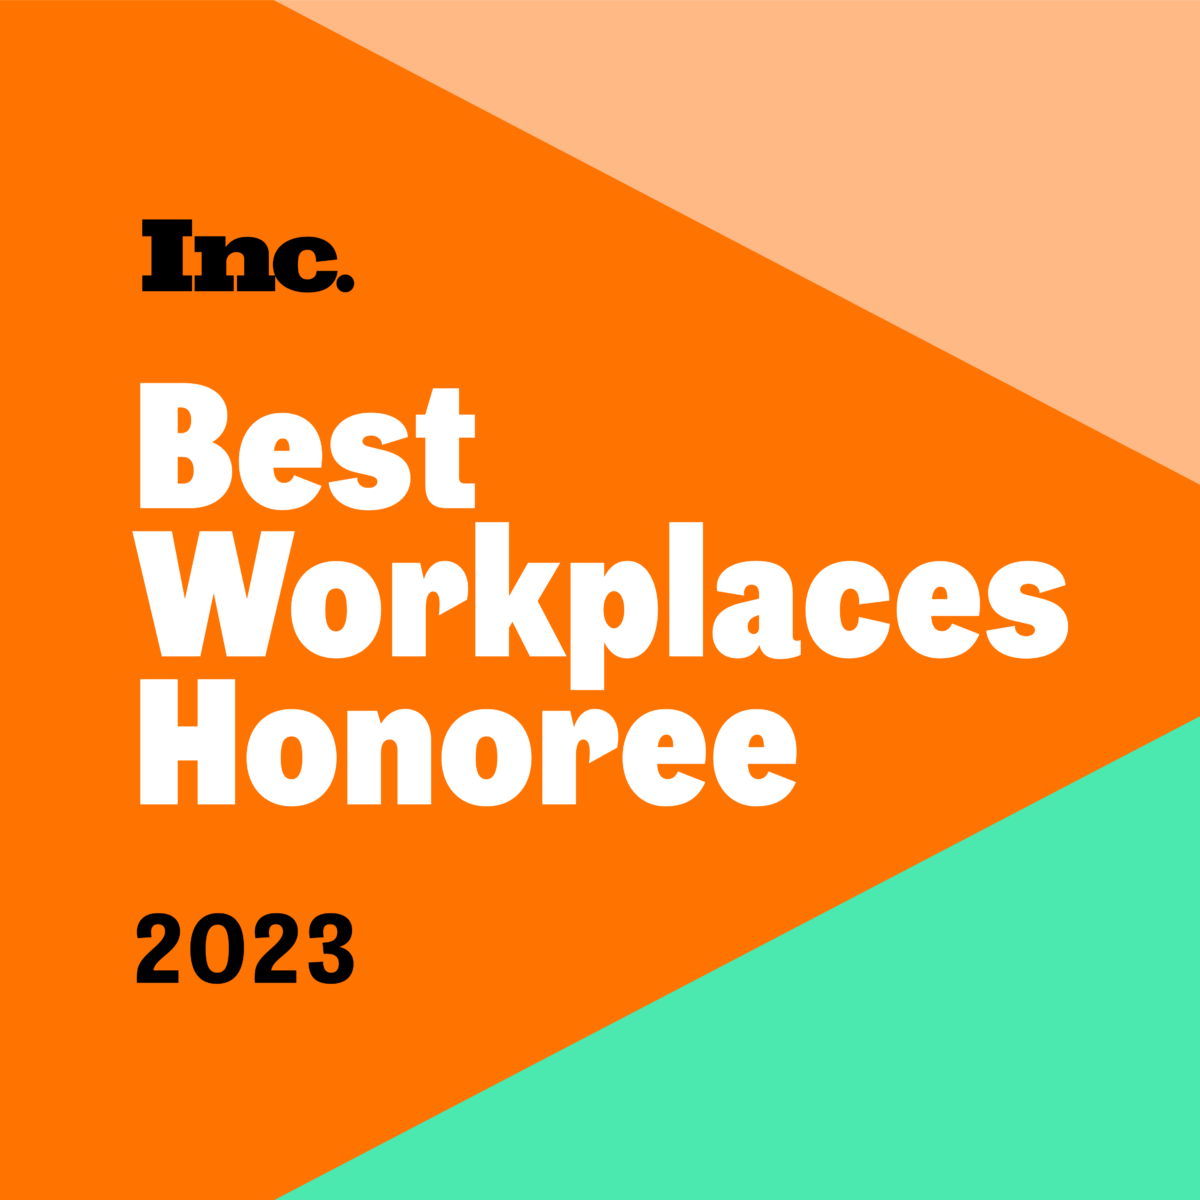 Corporate Ink named 2023 Best Workplace by Inc. Magazine.